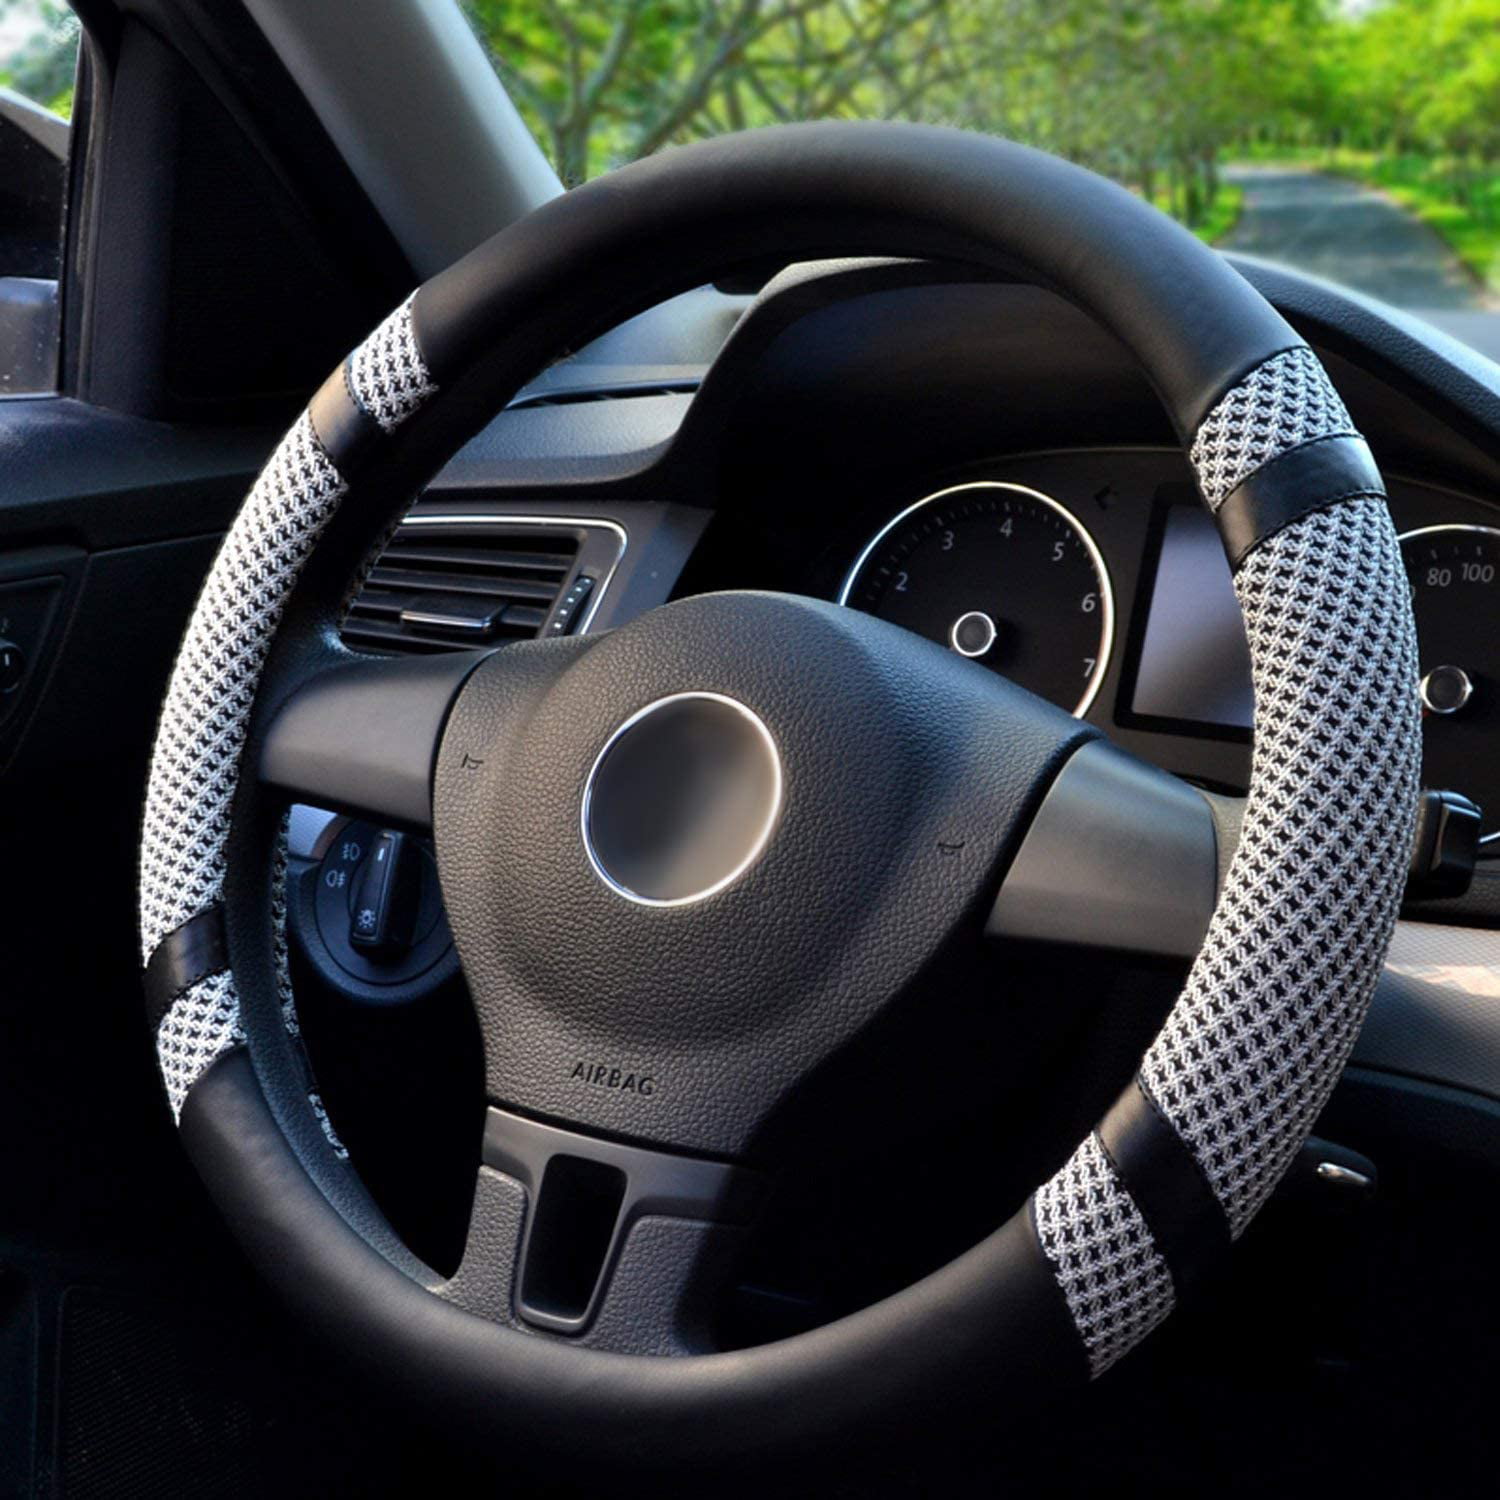 Universal 15 Inches Breathable Warm in Winter Cool in Summer EEPIRR Steering Wheel Cover Microfiber Leather Viscose Anti-Slip Odorless 